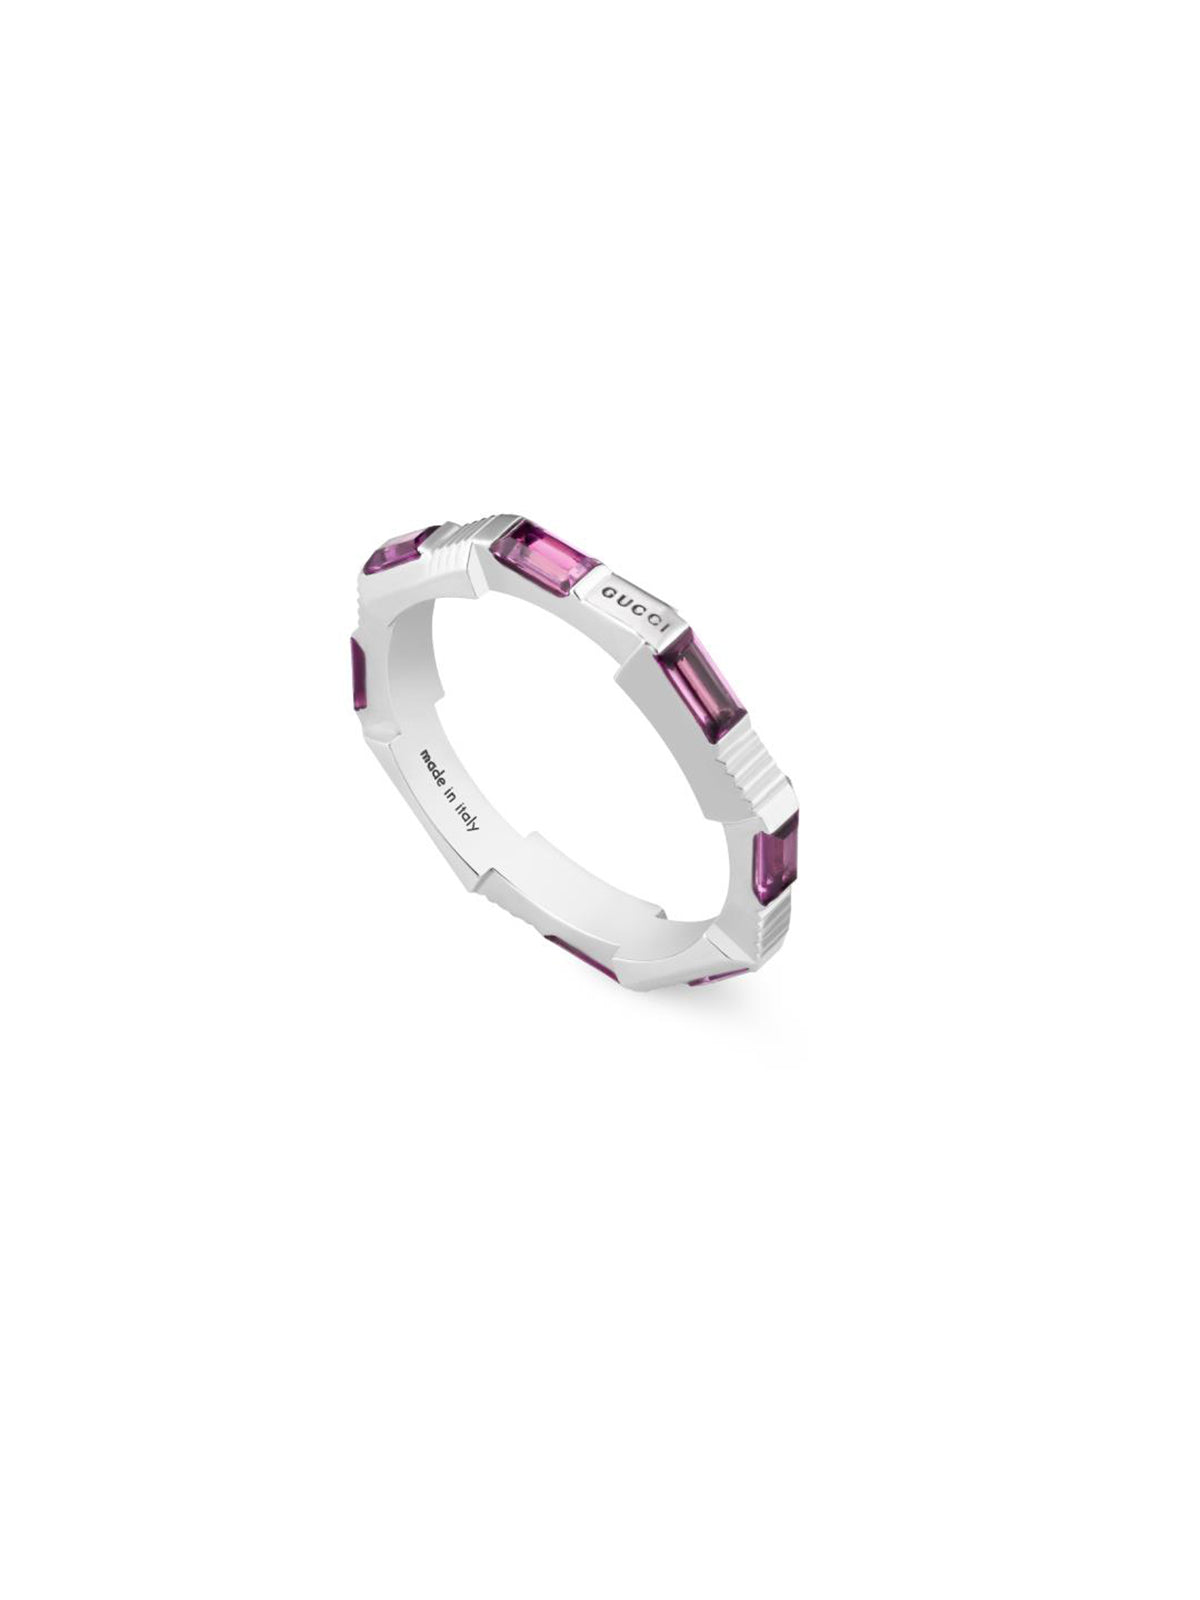 Gucci Link to Love Rubellite Ring in 18ct White Gold - Size 14